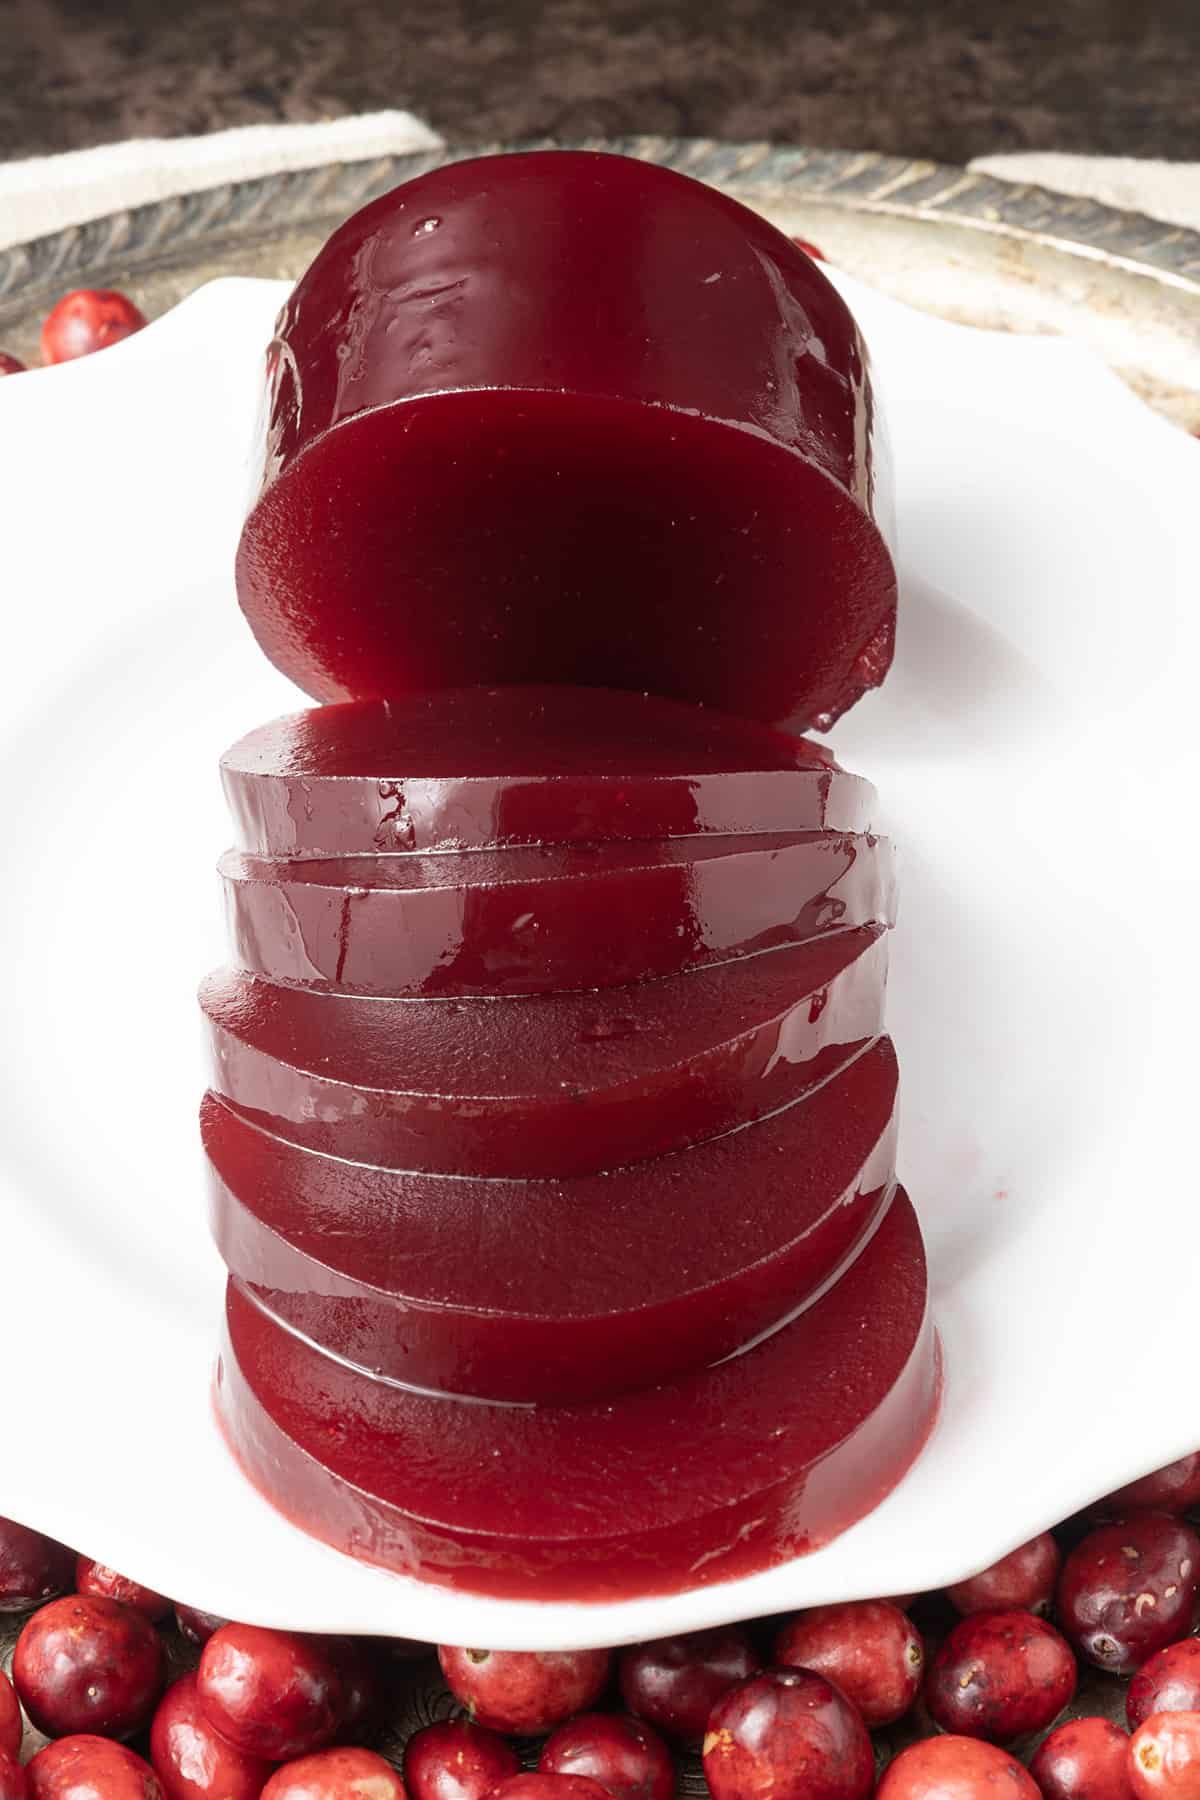 Jellied Cranberry Sauce - Canned or Refrigerated